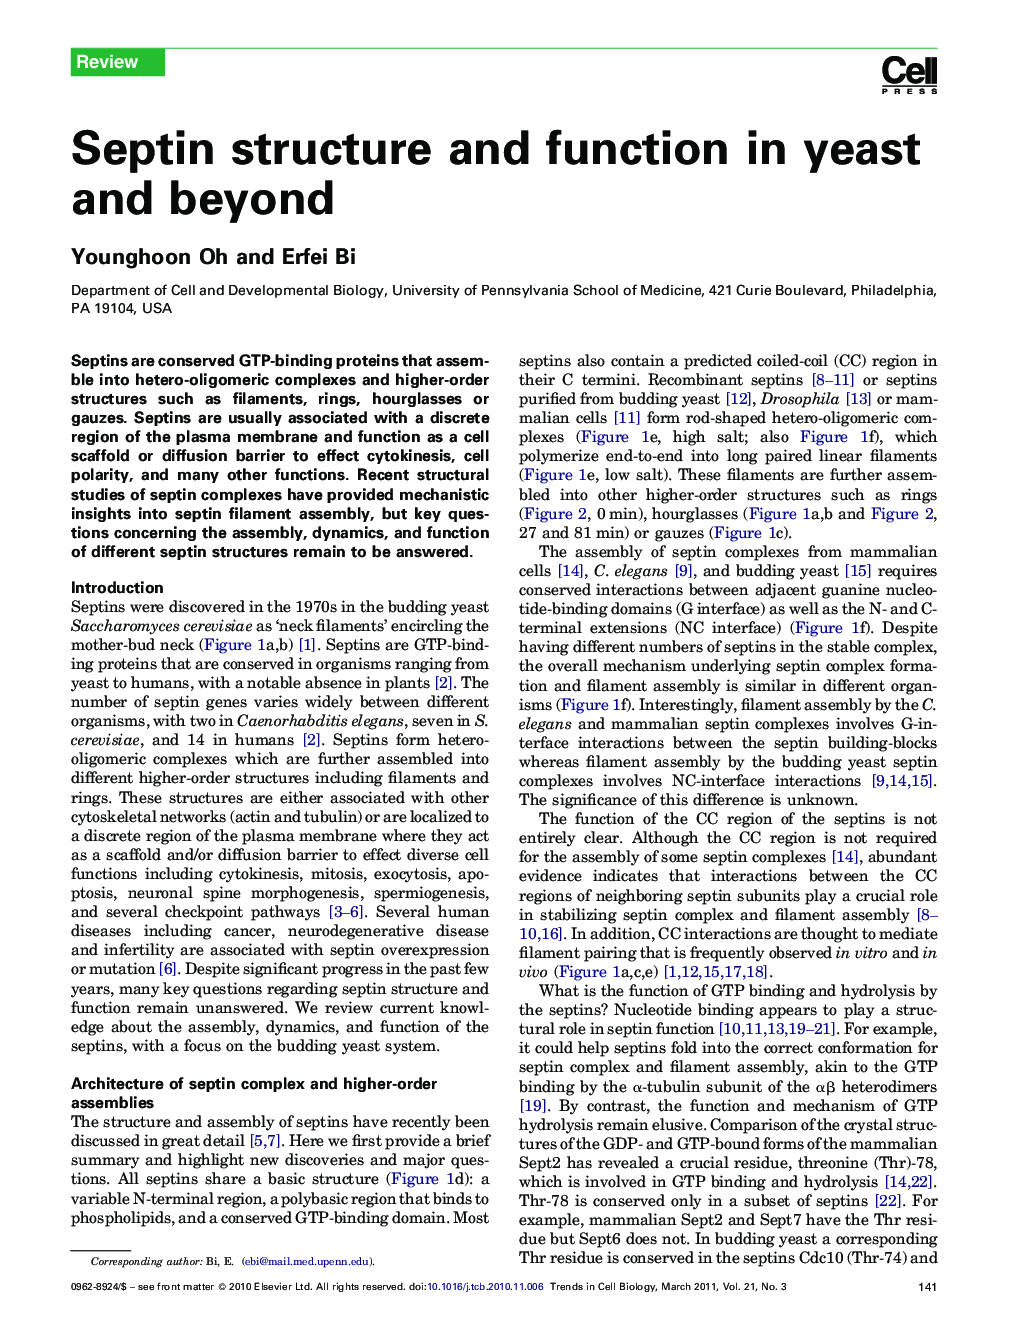 Septin structure and function in yeast and beyond